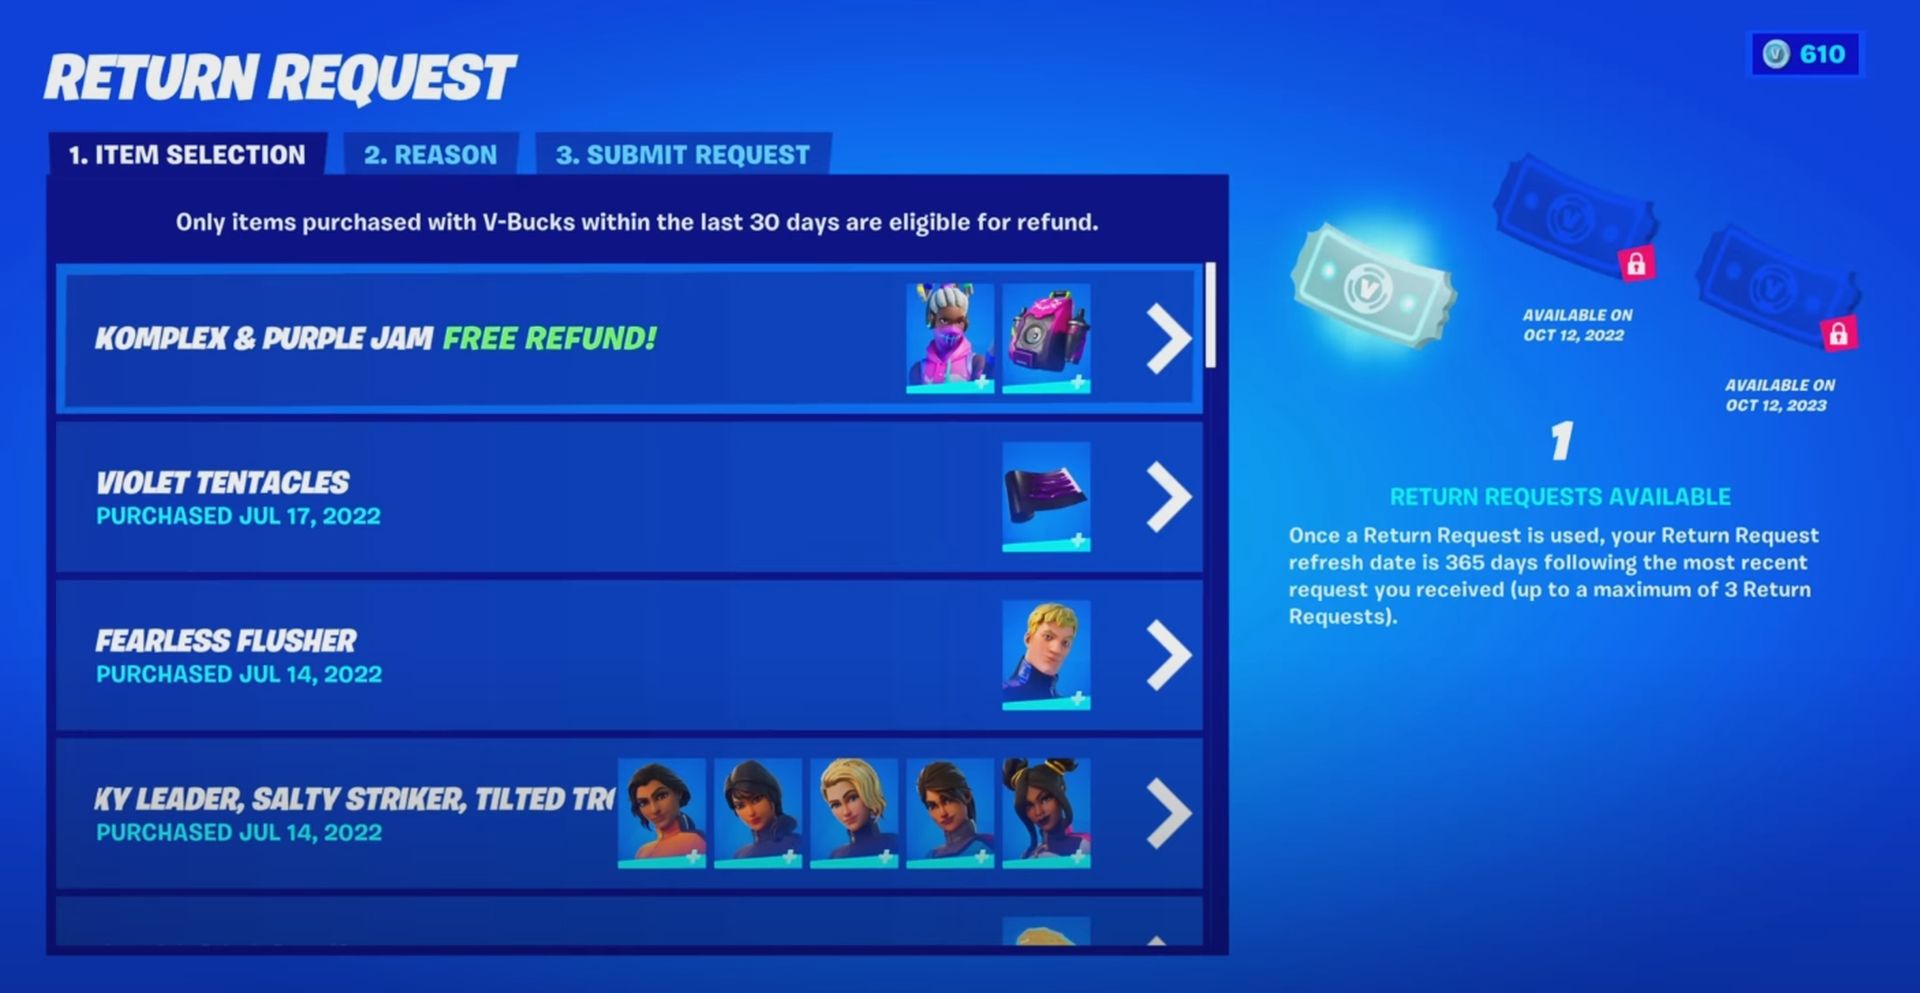 Today, we are covering how to claim or refund Komplex skin in Fortnite, so you can decide whether to keep it or return it after the changes made to it.